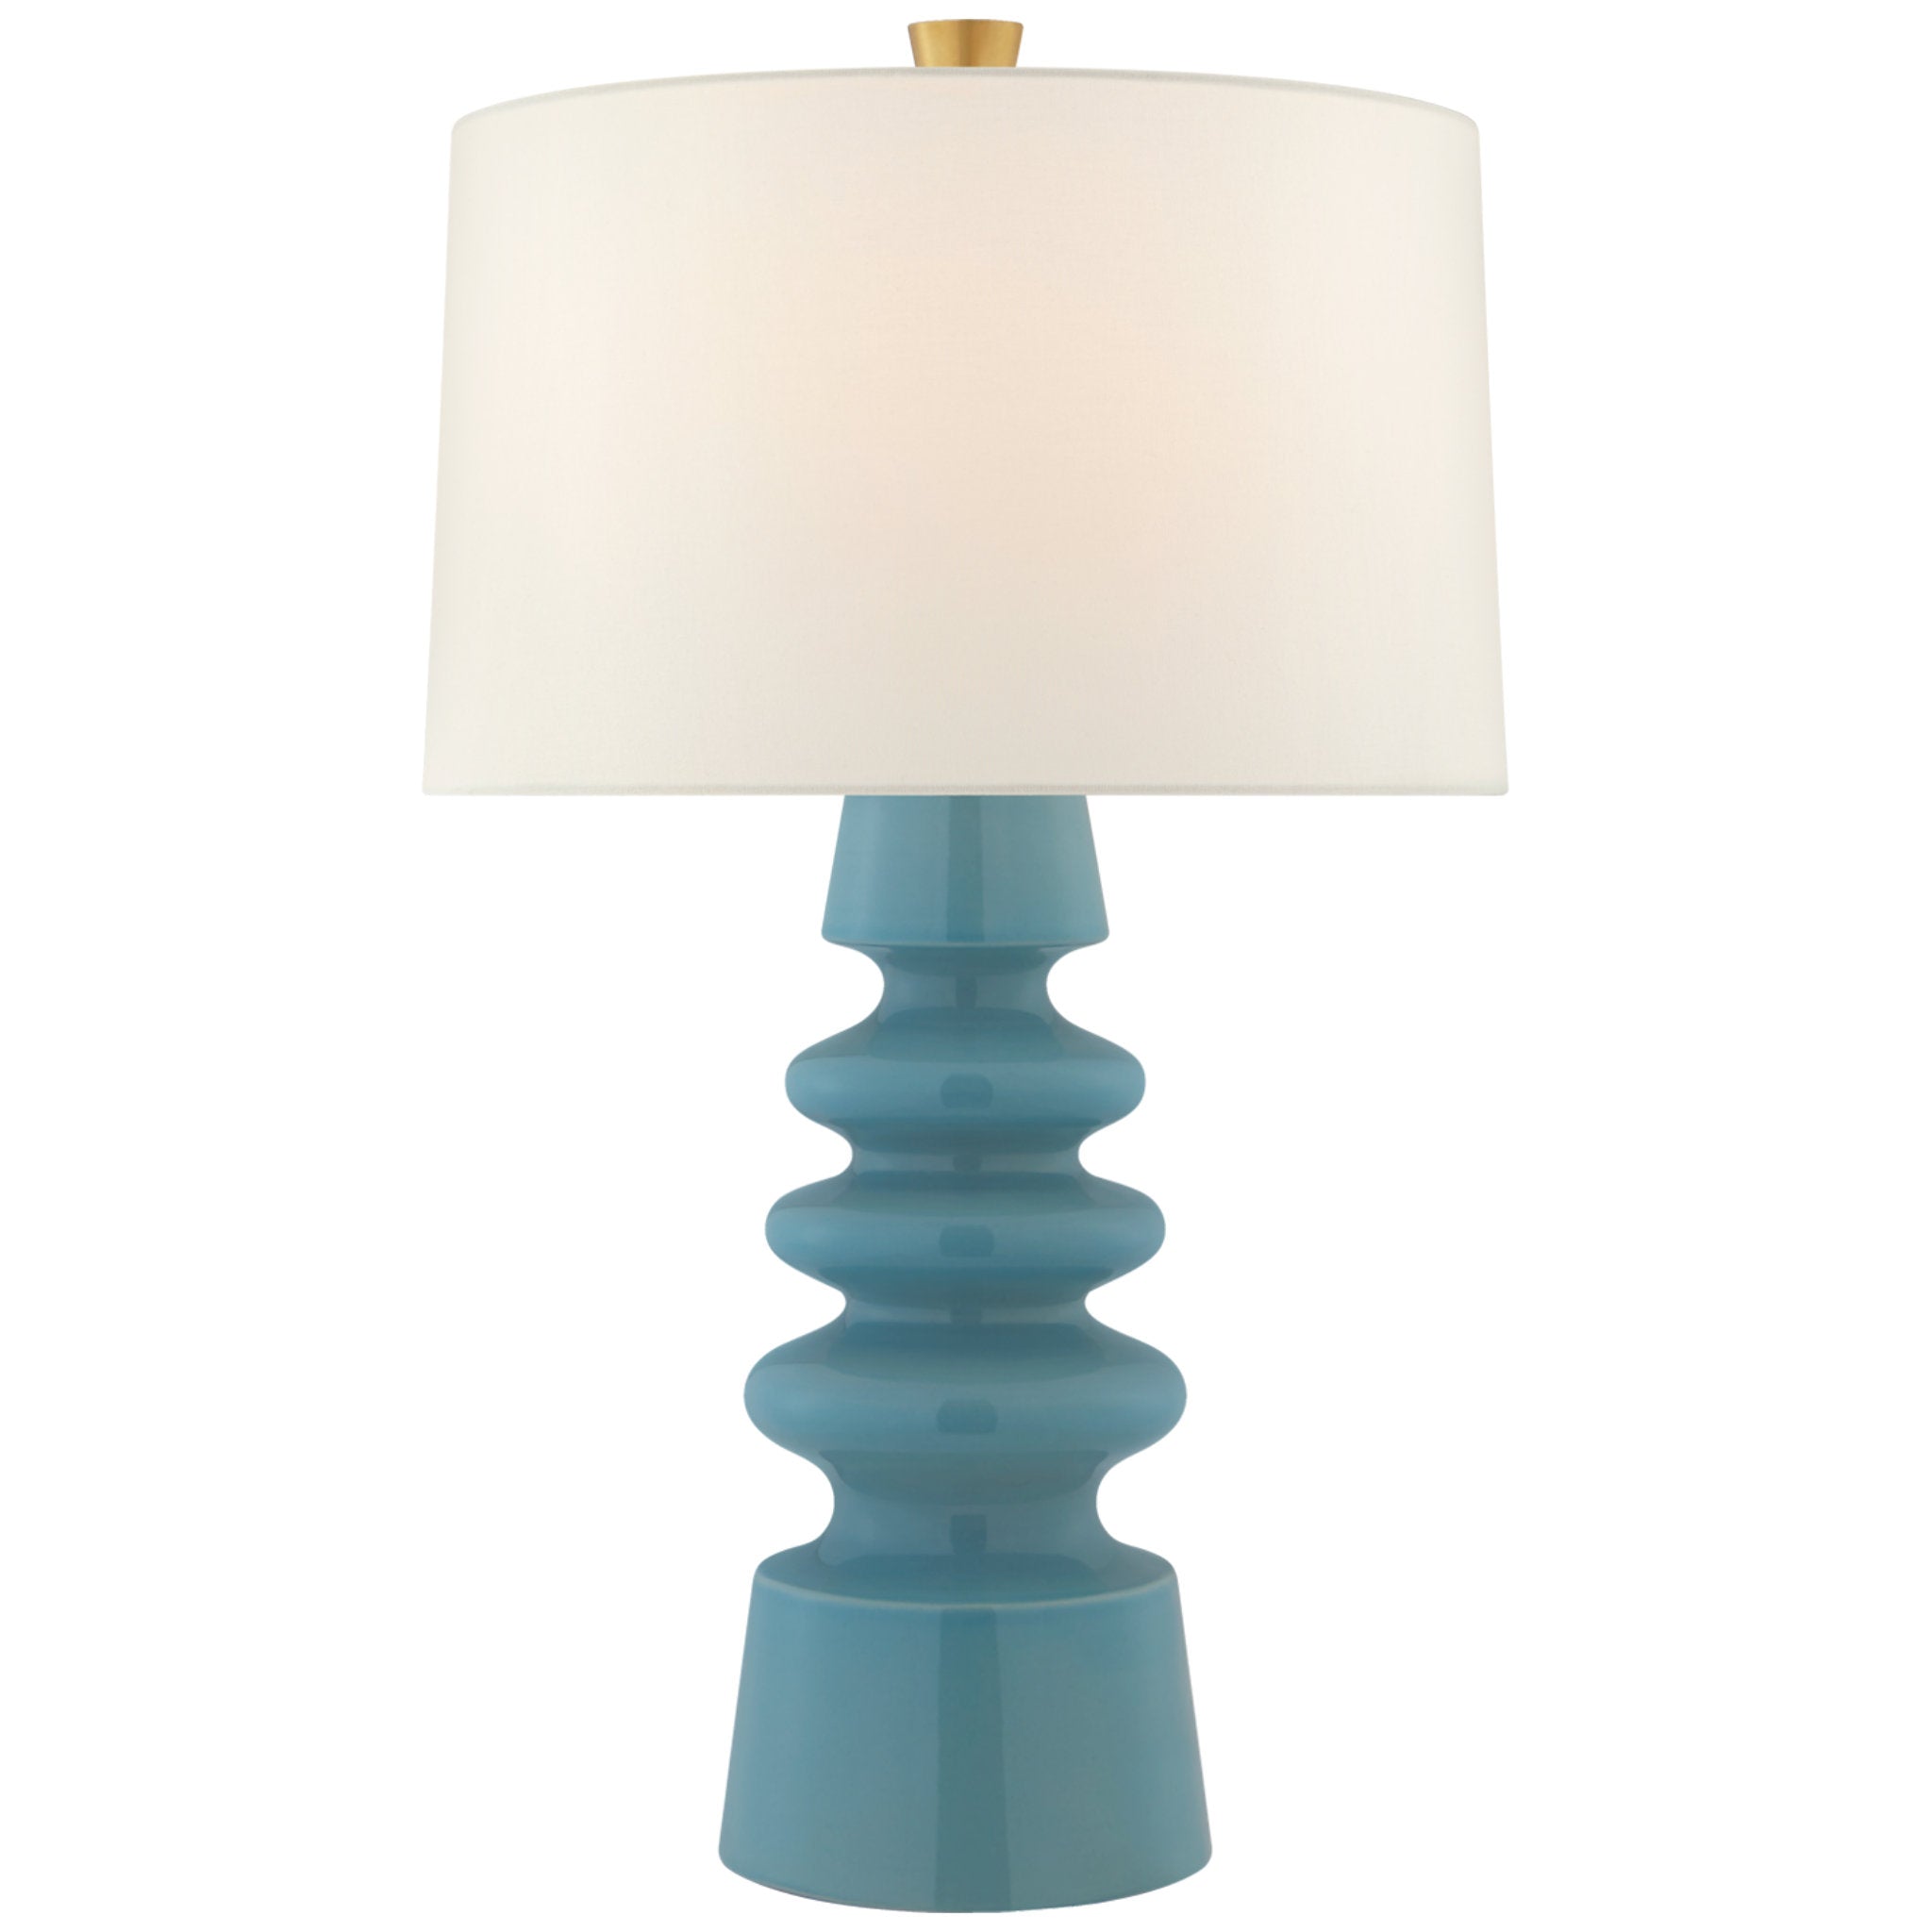 Julie Neill Andreas Medium Table Lamp in Blue Jade with Linen Shade